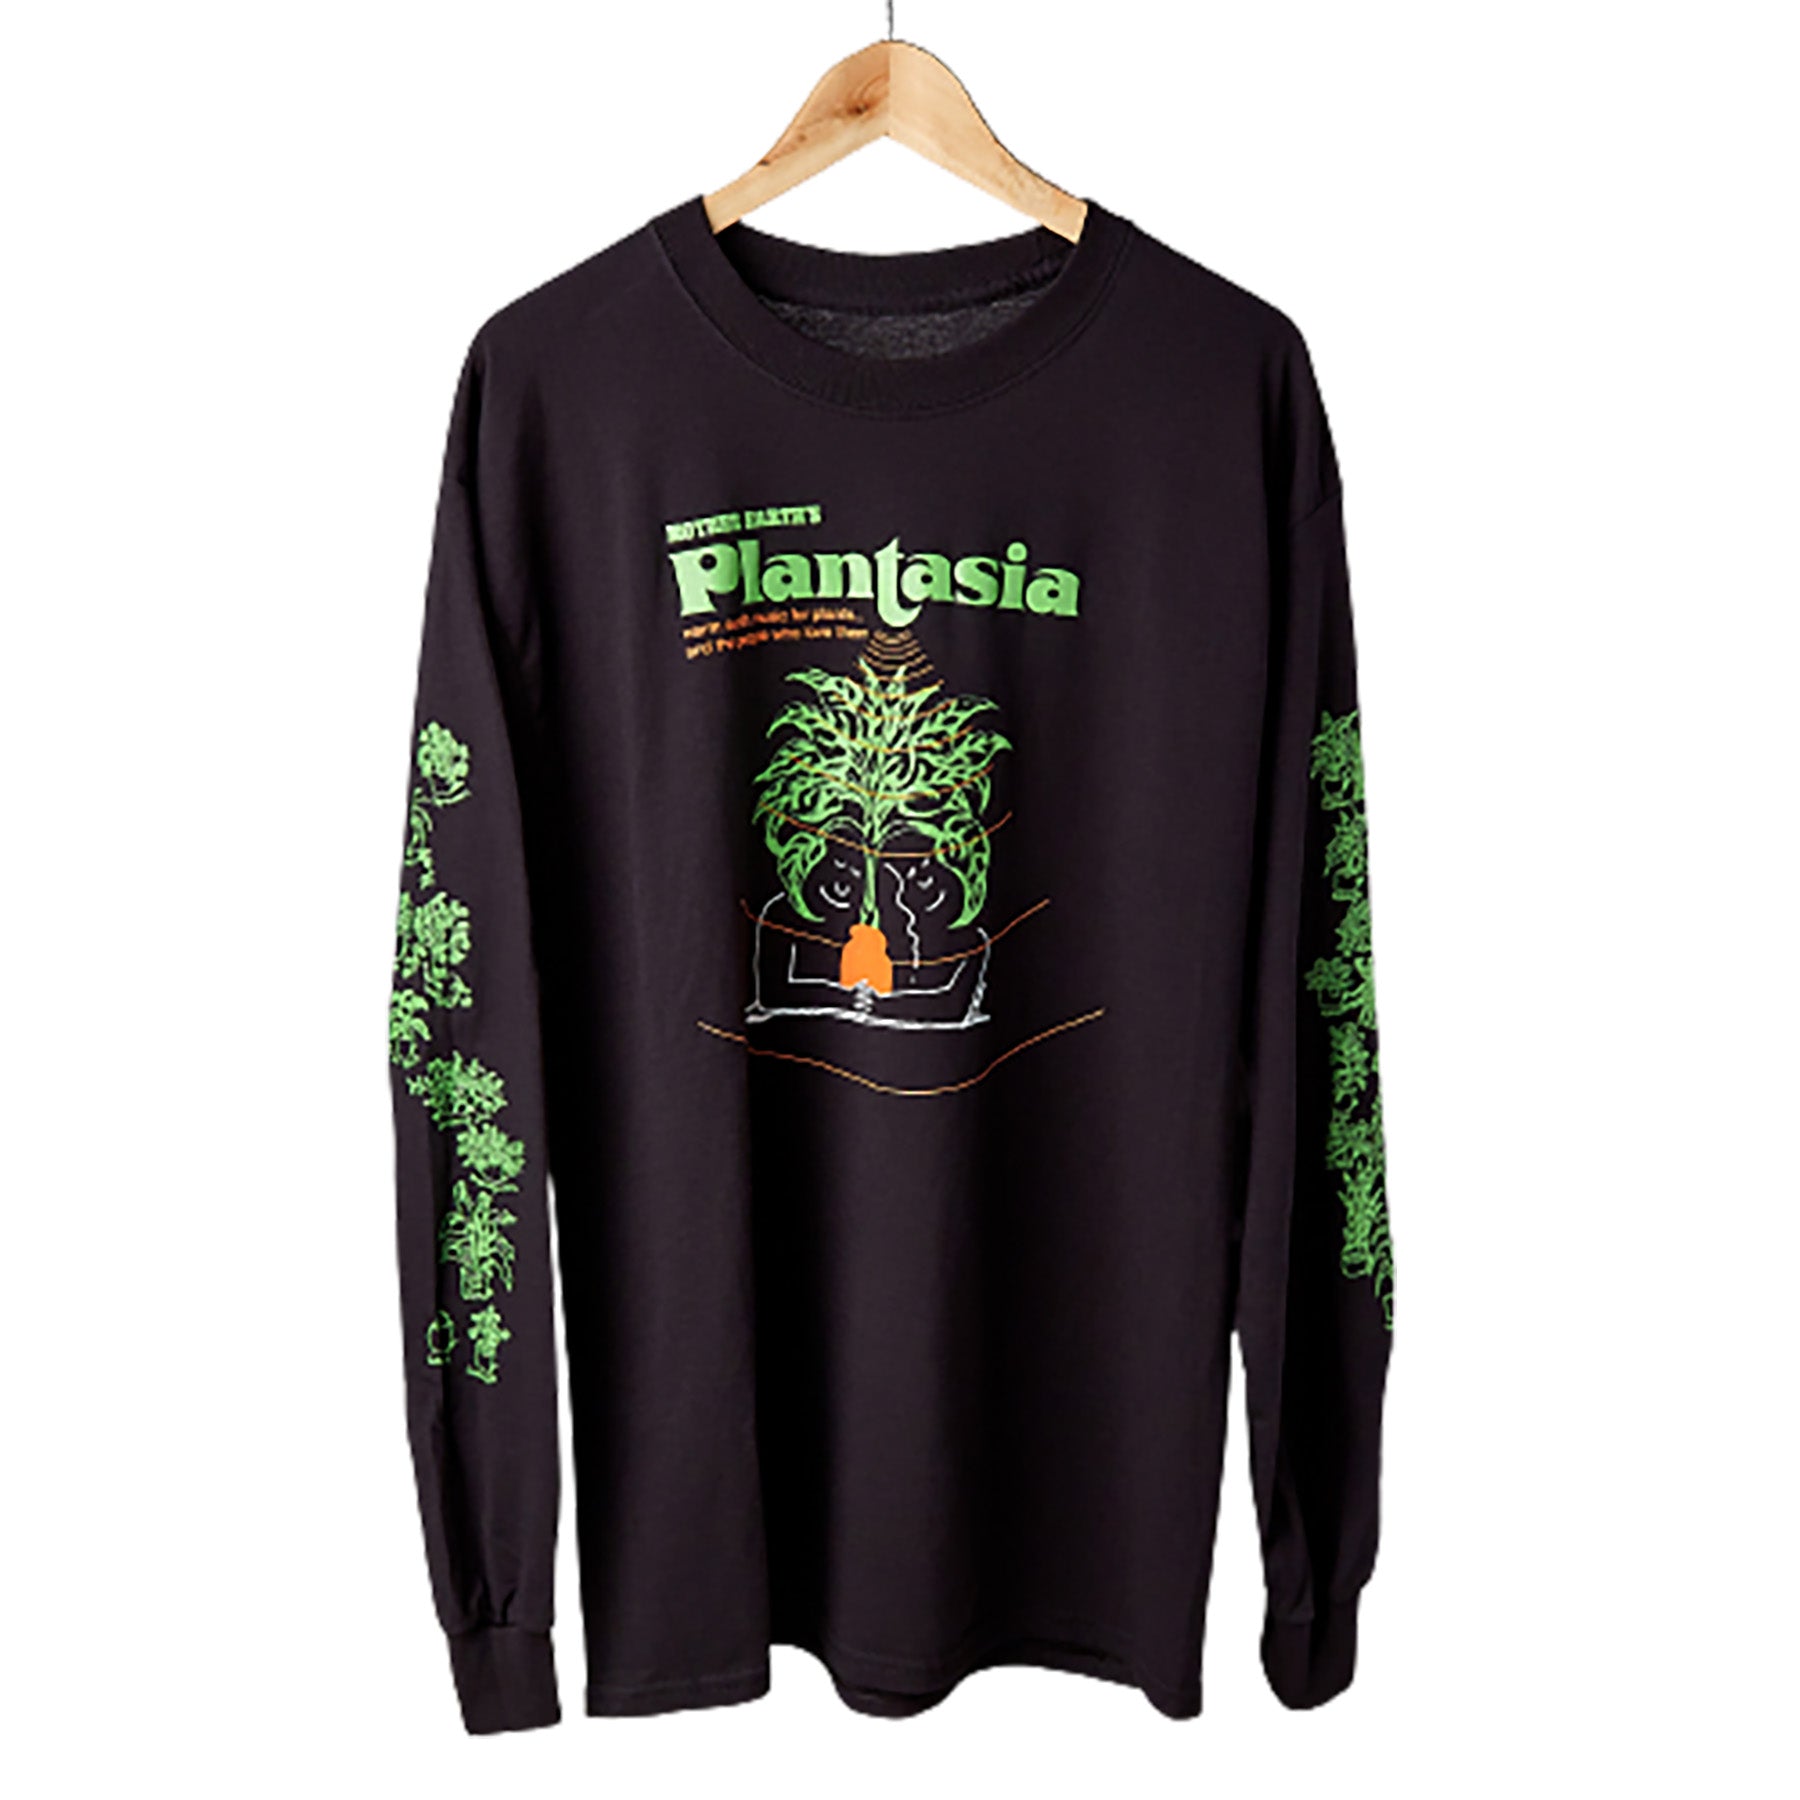 A black long-sleeve t-shirt with a green plant on it, perfect for plant enthusiasts looking for the best garden center near them.